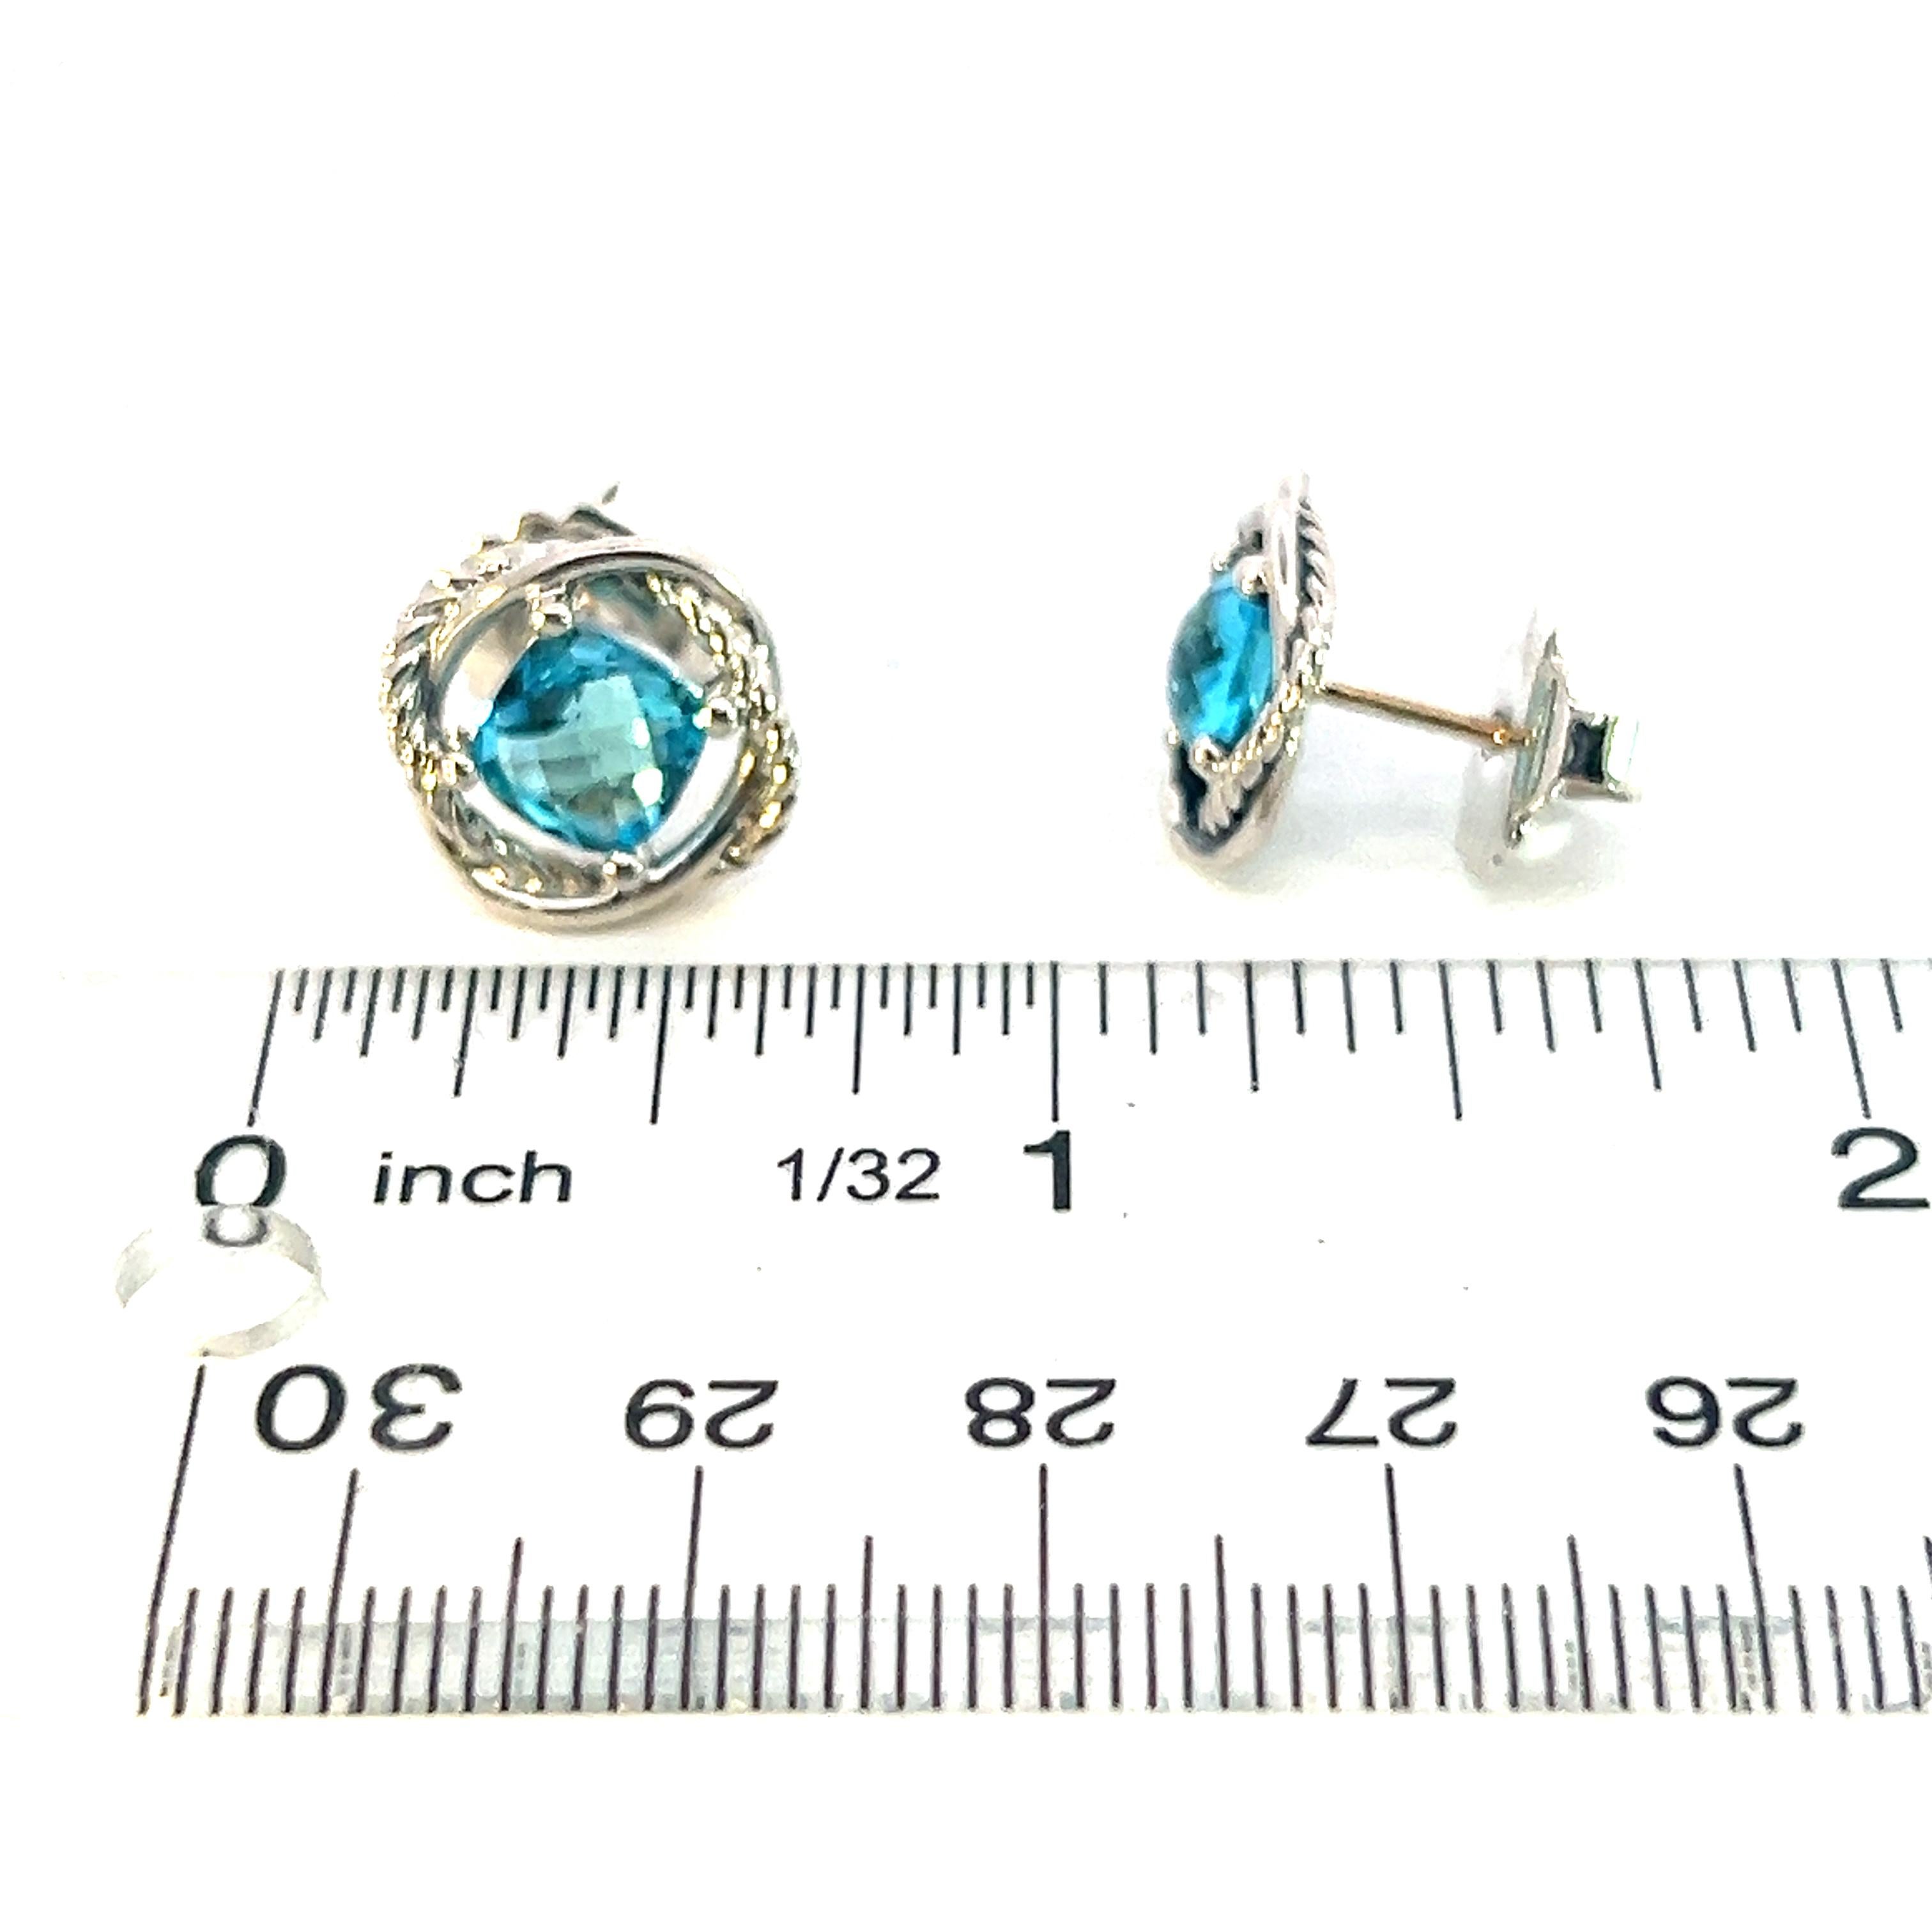 Authentic David Yurman Estate Blue Topaz Infinity Earrings Silver DY426

Retail: $590.00

These elegant Authentic David Yurman earrings are made of sterling silver.

TRUSTED SELLER SINCE 2002
PLEASE SEE OUR HUNDREDS OF POSITIVE FEEDBACKS FROM OUR